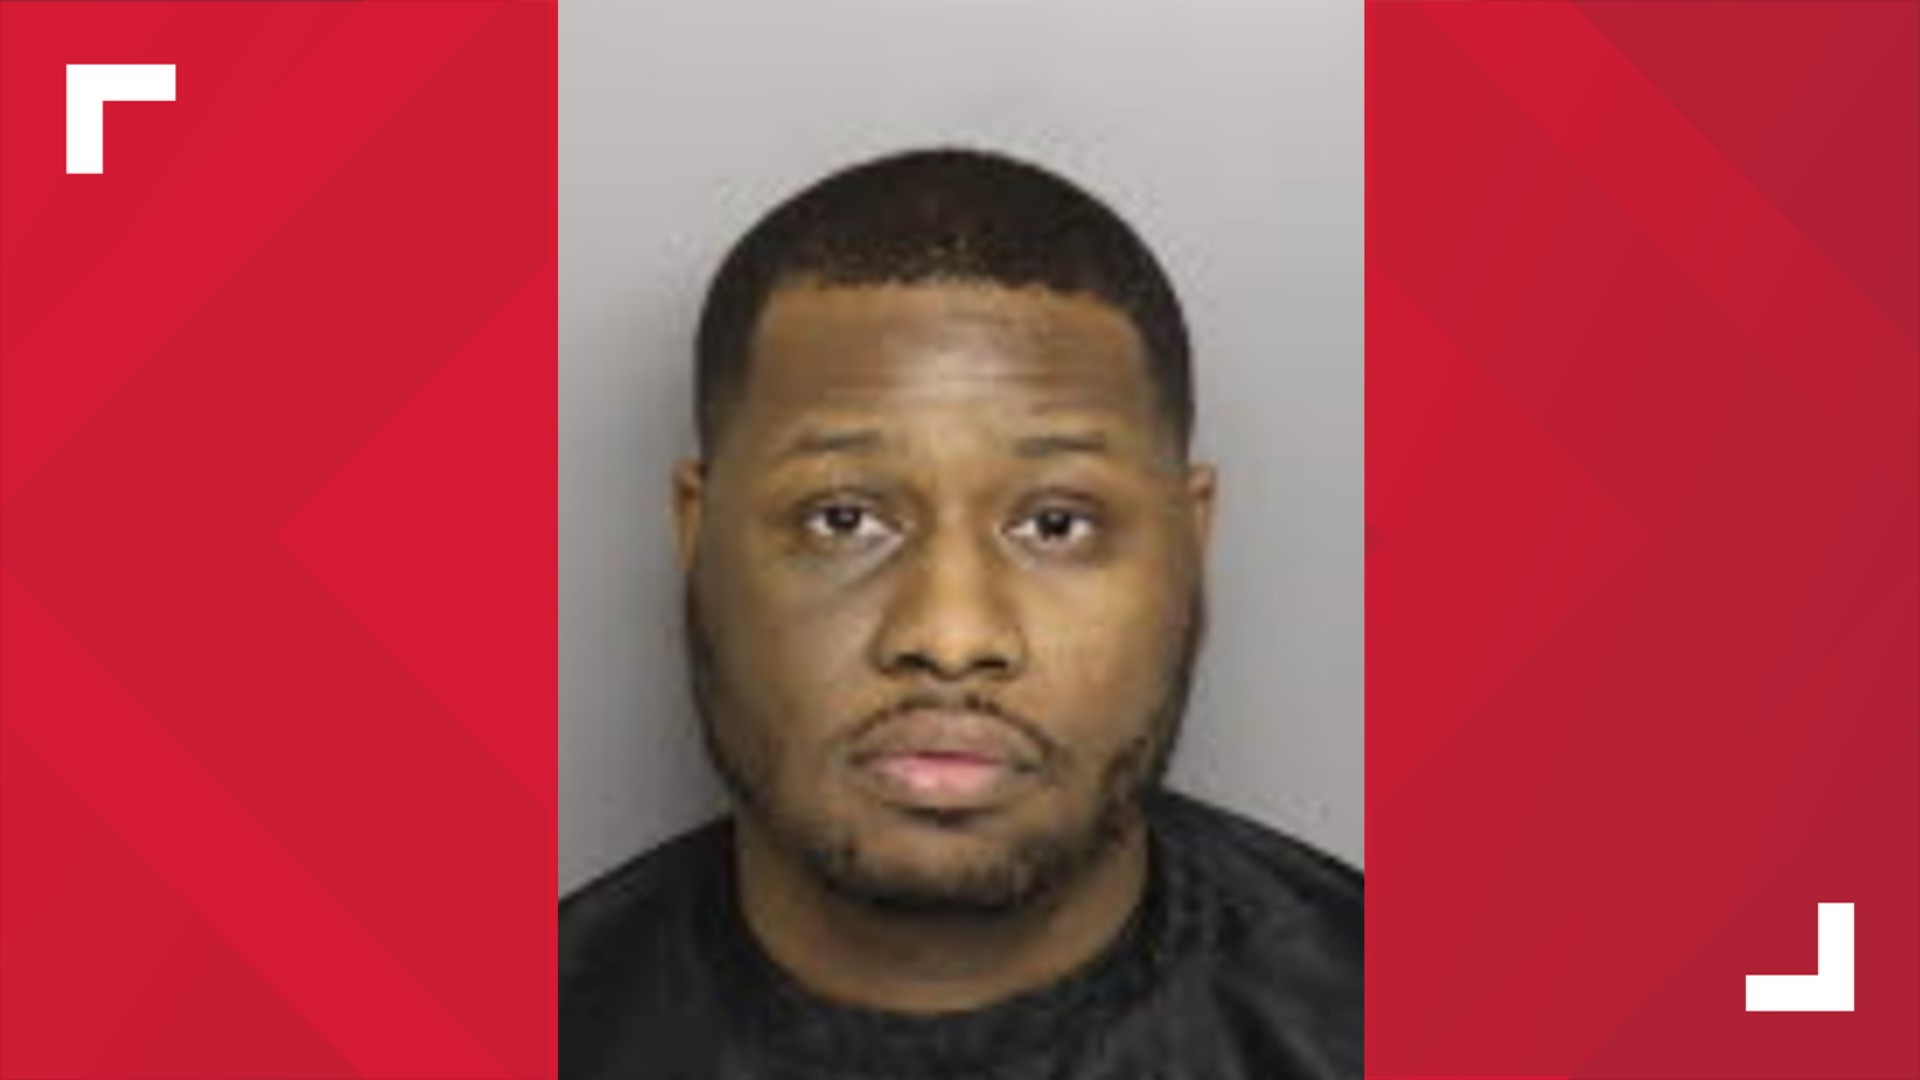 The suspect, 30-year-old Jacoby Howard, was arrested in Greenville, South Carolina, by the US Marshals Service, according to police.